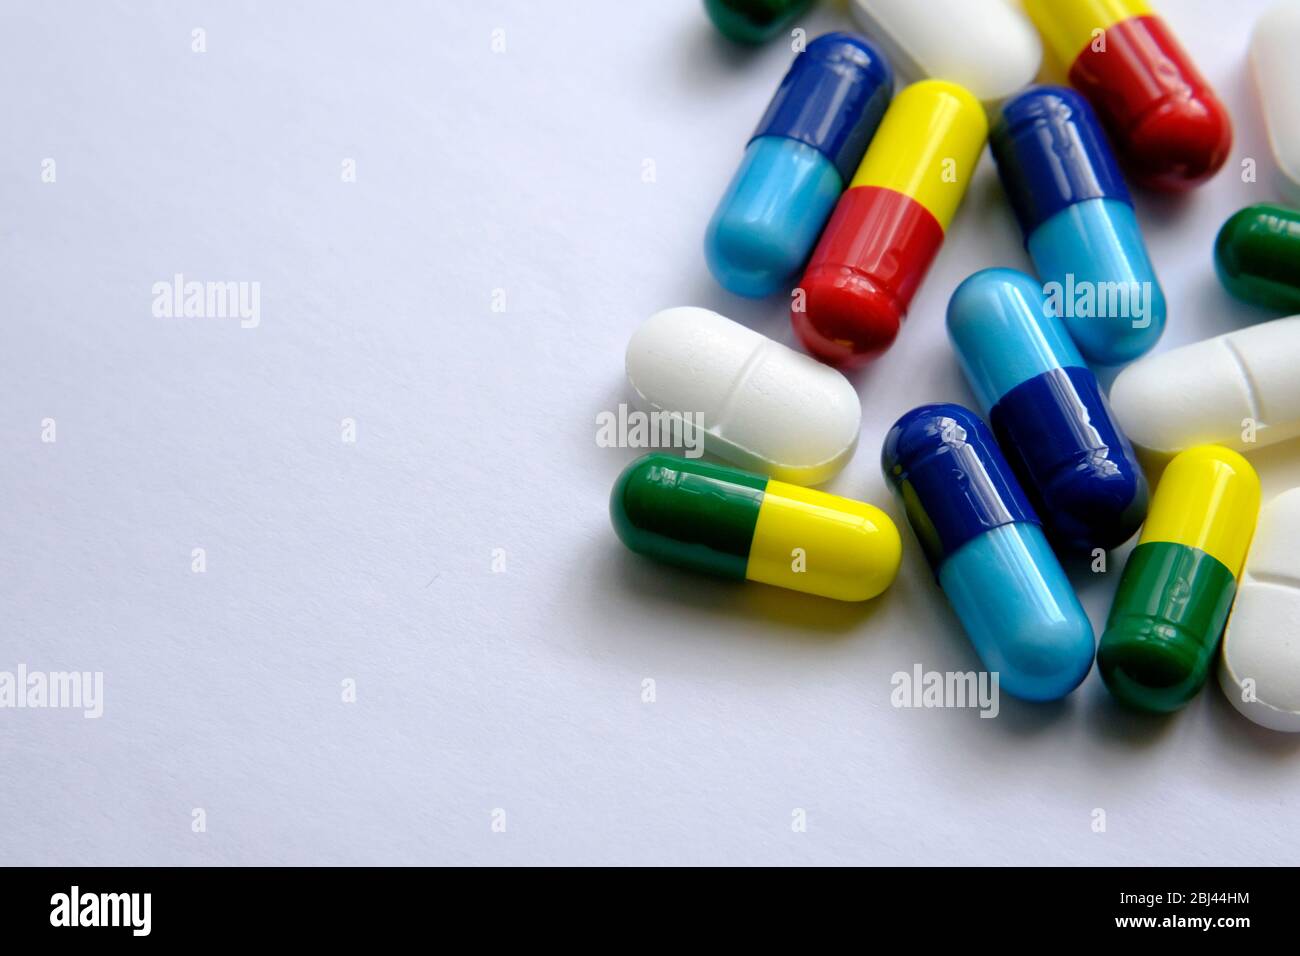 Pile of pills of different colours: blue, yellow, red and white) placed on top of white paper. Illustrative for medical, health and other subjects. Ma Stock Photo